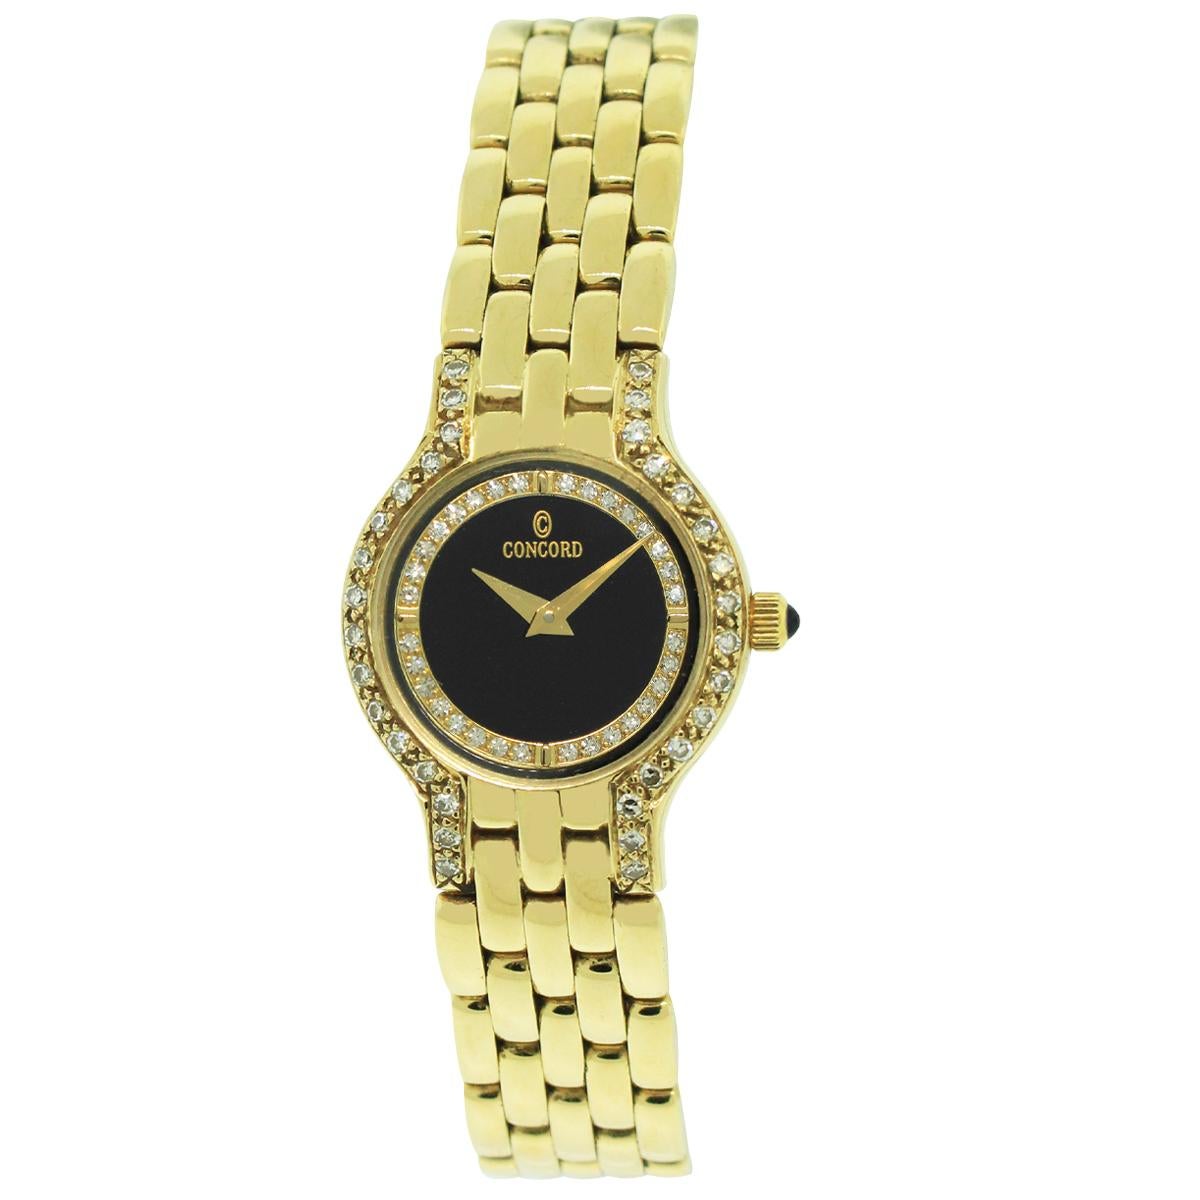 Brand: Concord
Model: Le Palais
Case Material: 14k Yellow Gold
Crystal: Sapphire crystal
Bezel: 18k Yellow Gold diamond bezel
Dial: Black dial with yellow gold hour hands.
Bracelet: Yellow gold link bracelet
Case Size: 21mm
Size: 6